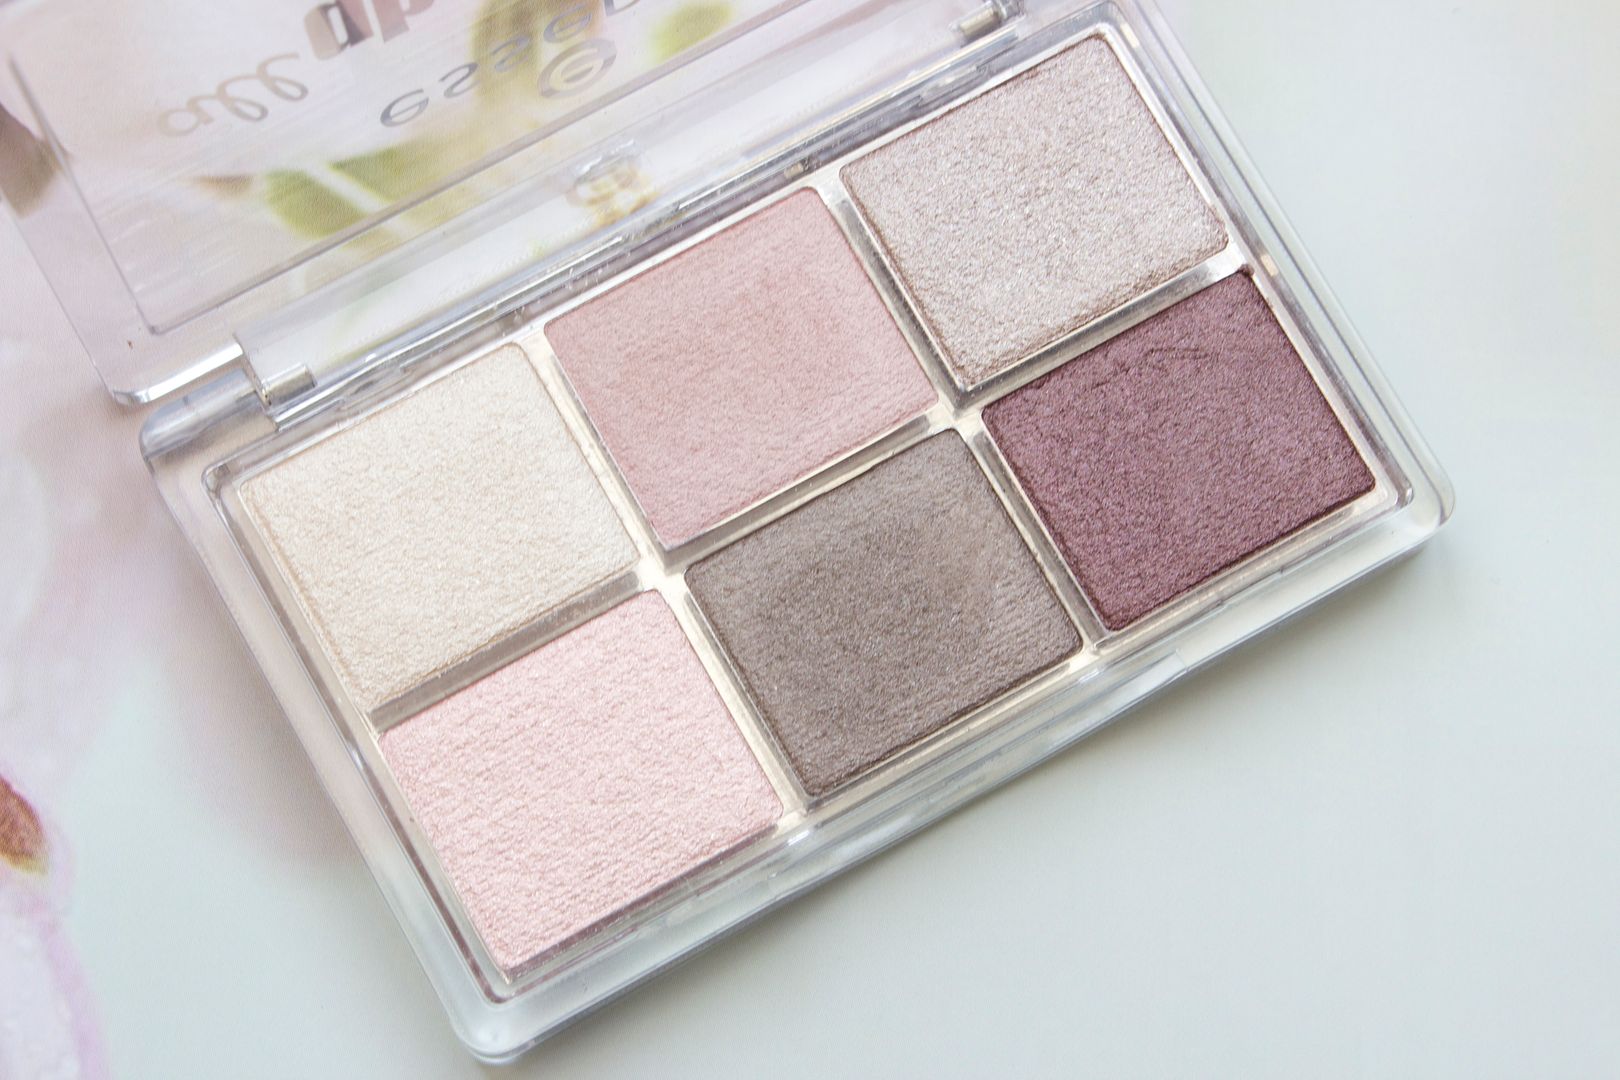 Essence All About Nude Eyeshadow